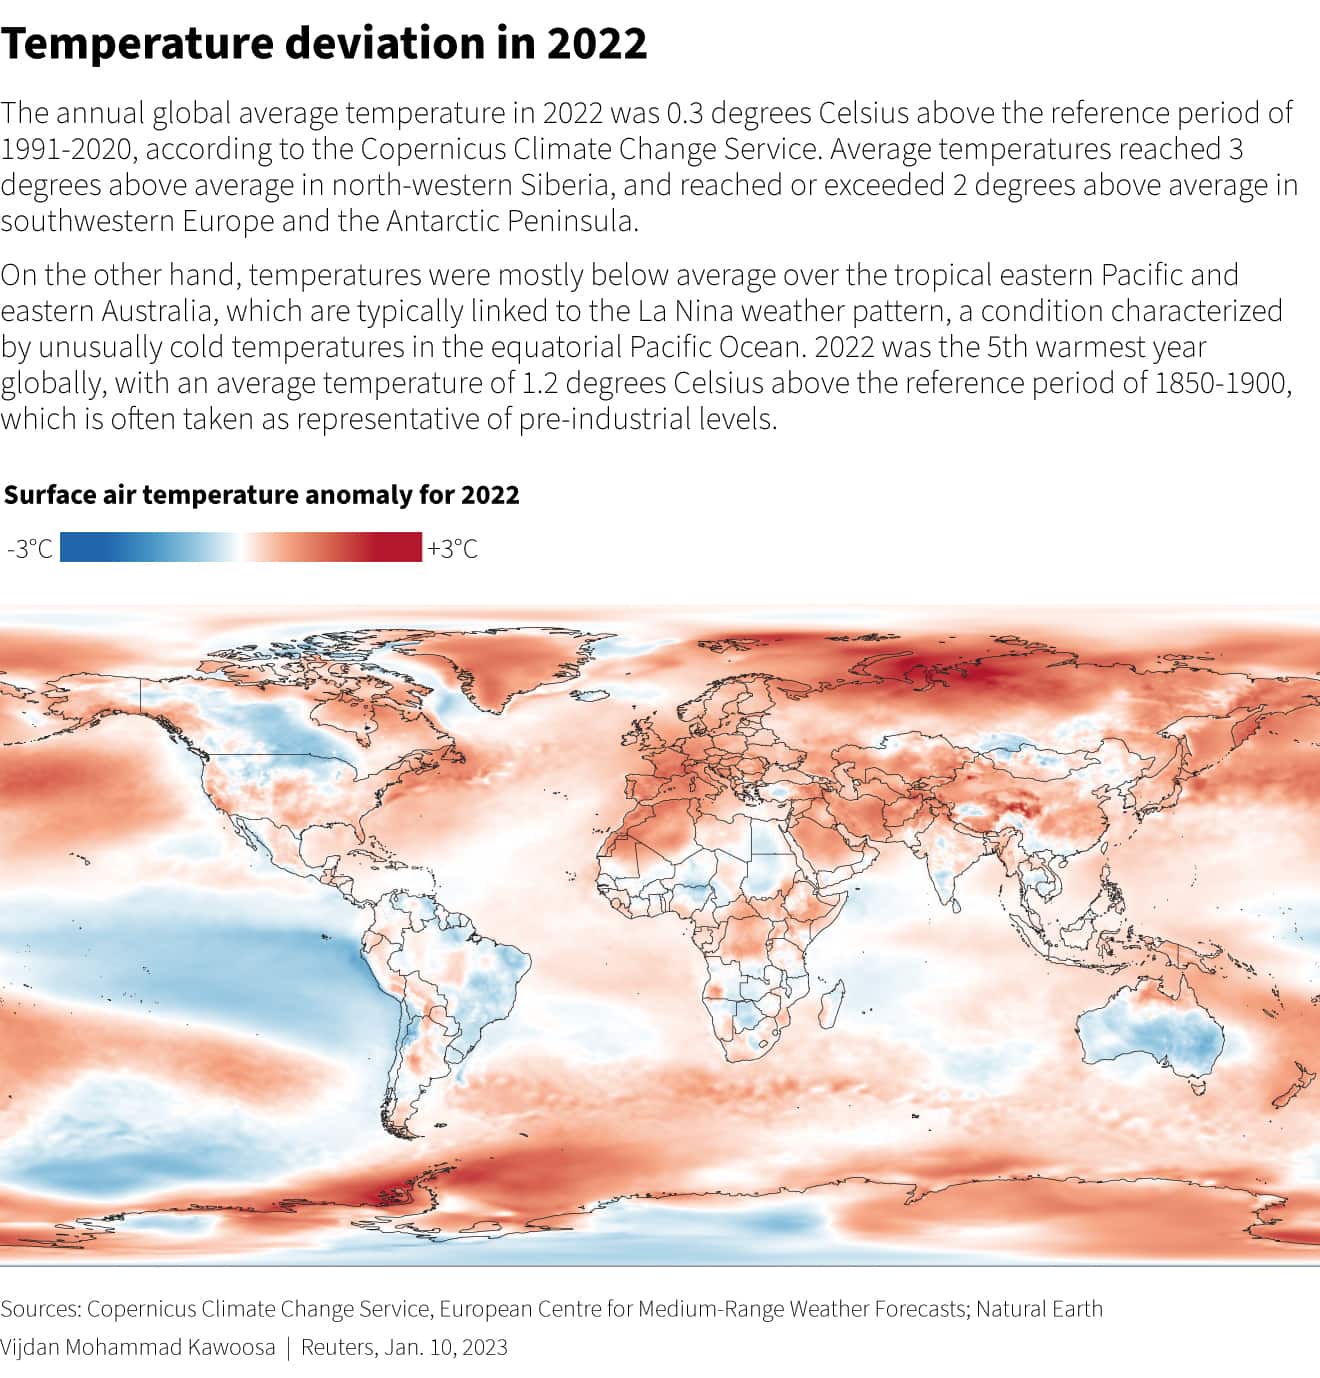 The European Union&#039;s Copernicus Climate Change Service shares its findings on the global climate for 2022 The annual global average temperature in 2022 was 0.3 degrees Celsius above the reference period of 1991-2020.